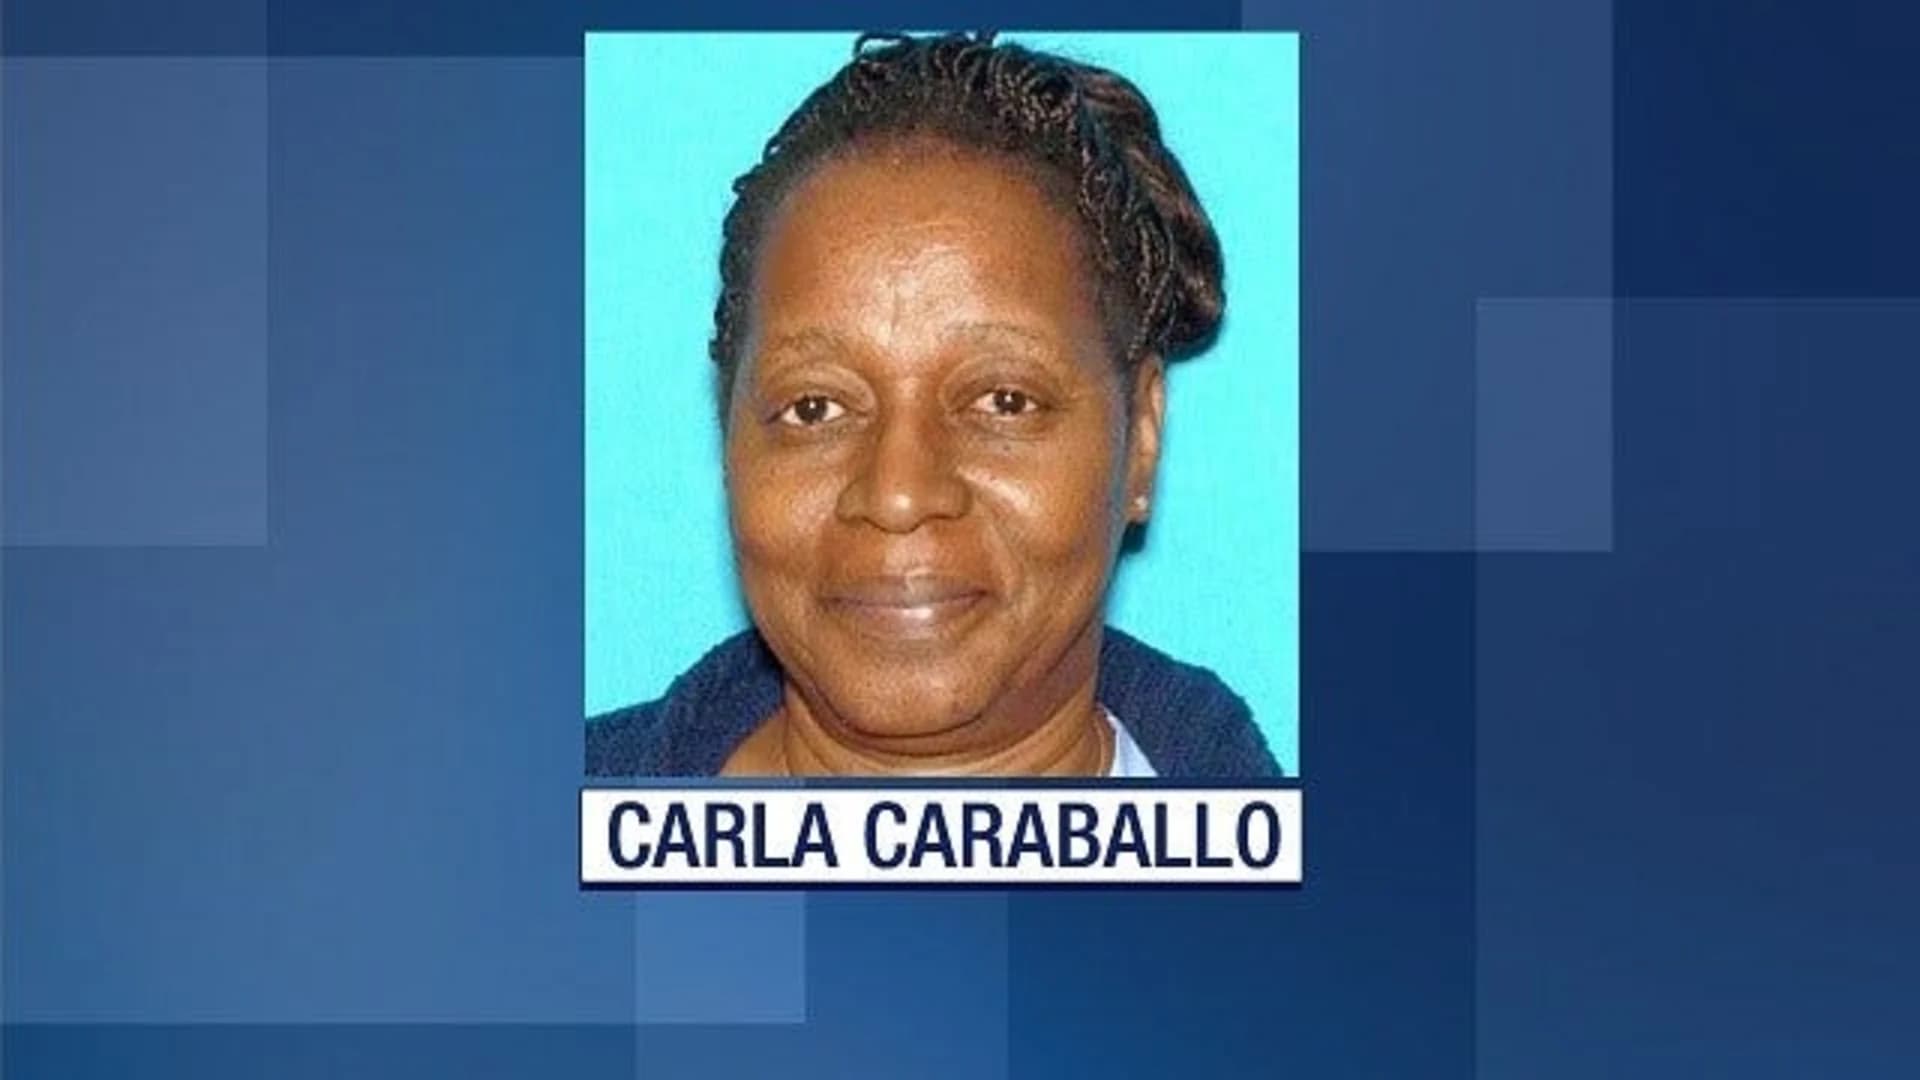 Home health aide indicted after caught on hidden camera